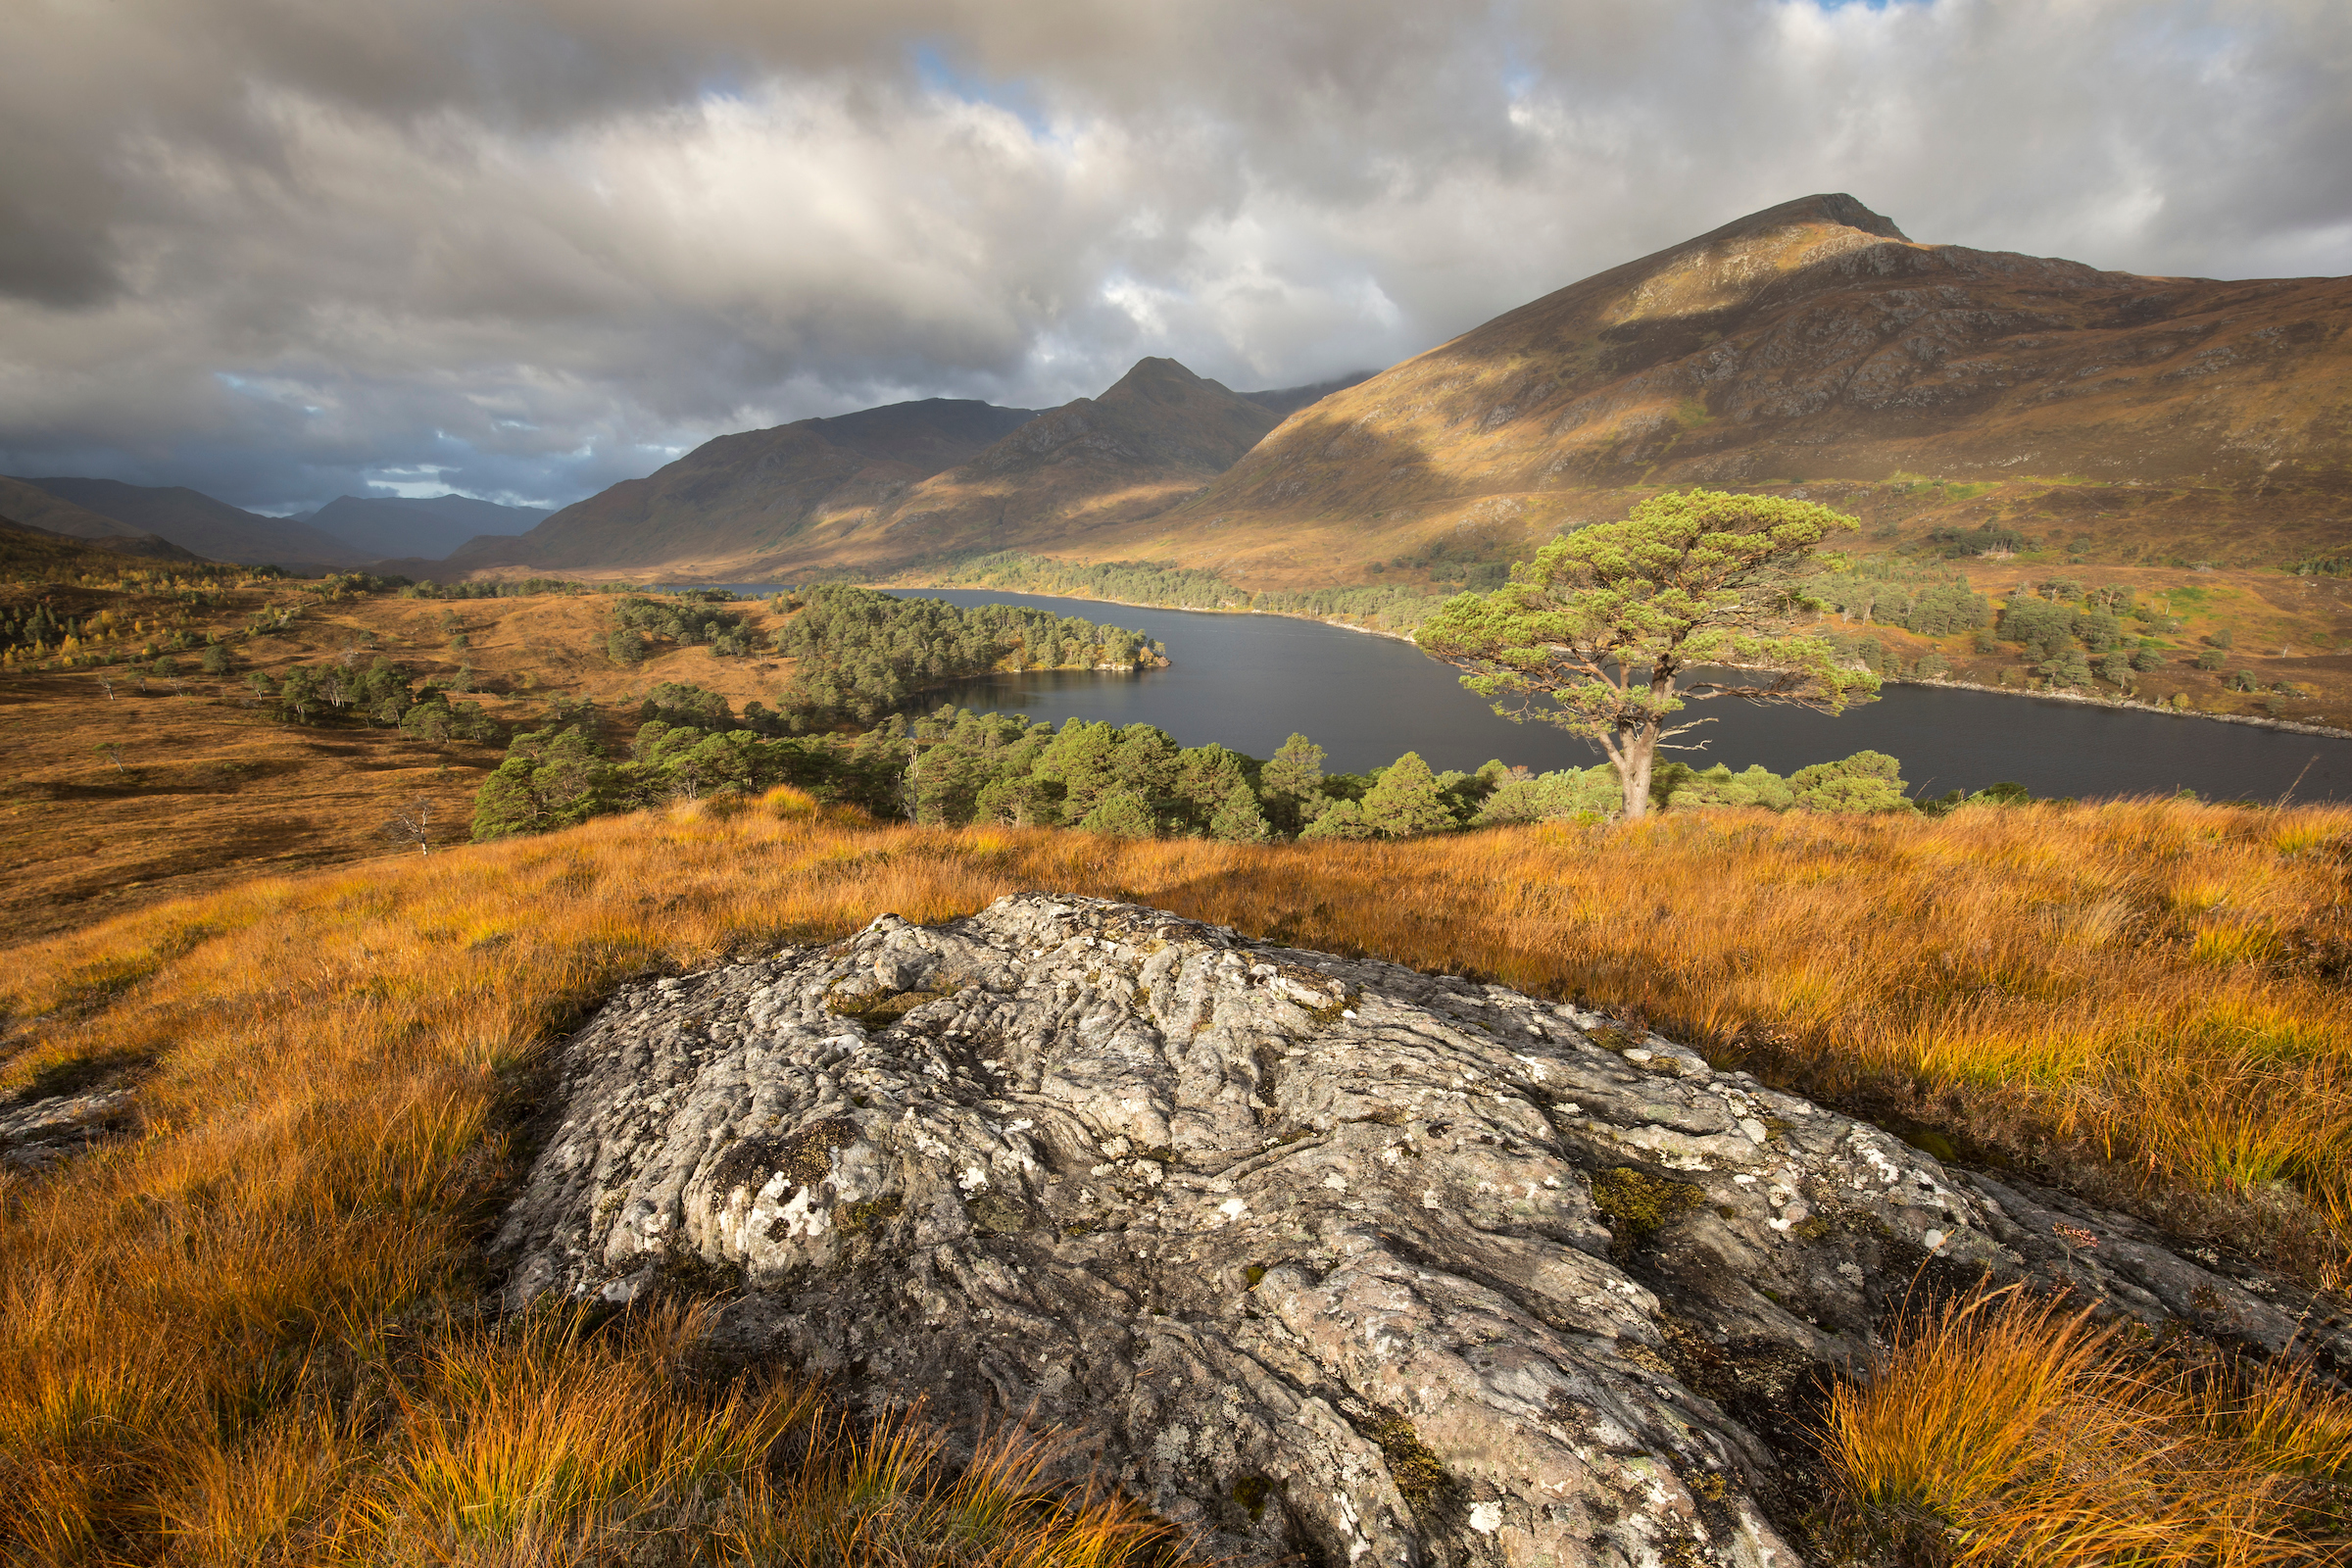 Rewilding Europe welcomes Affric Highlands as its ninth rewilding area